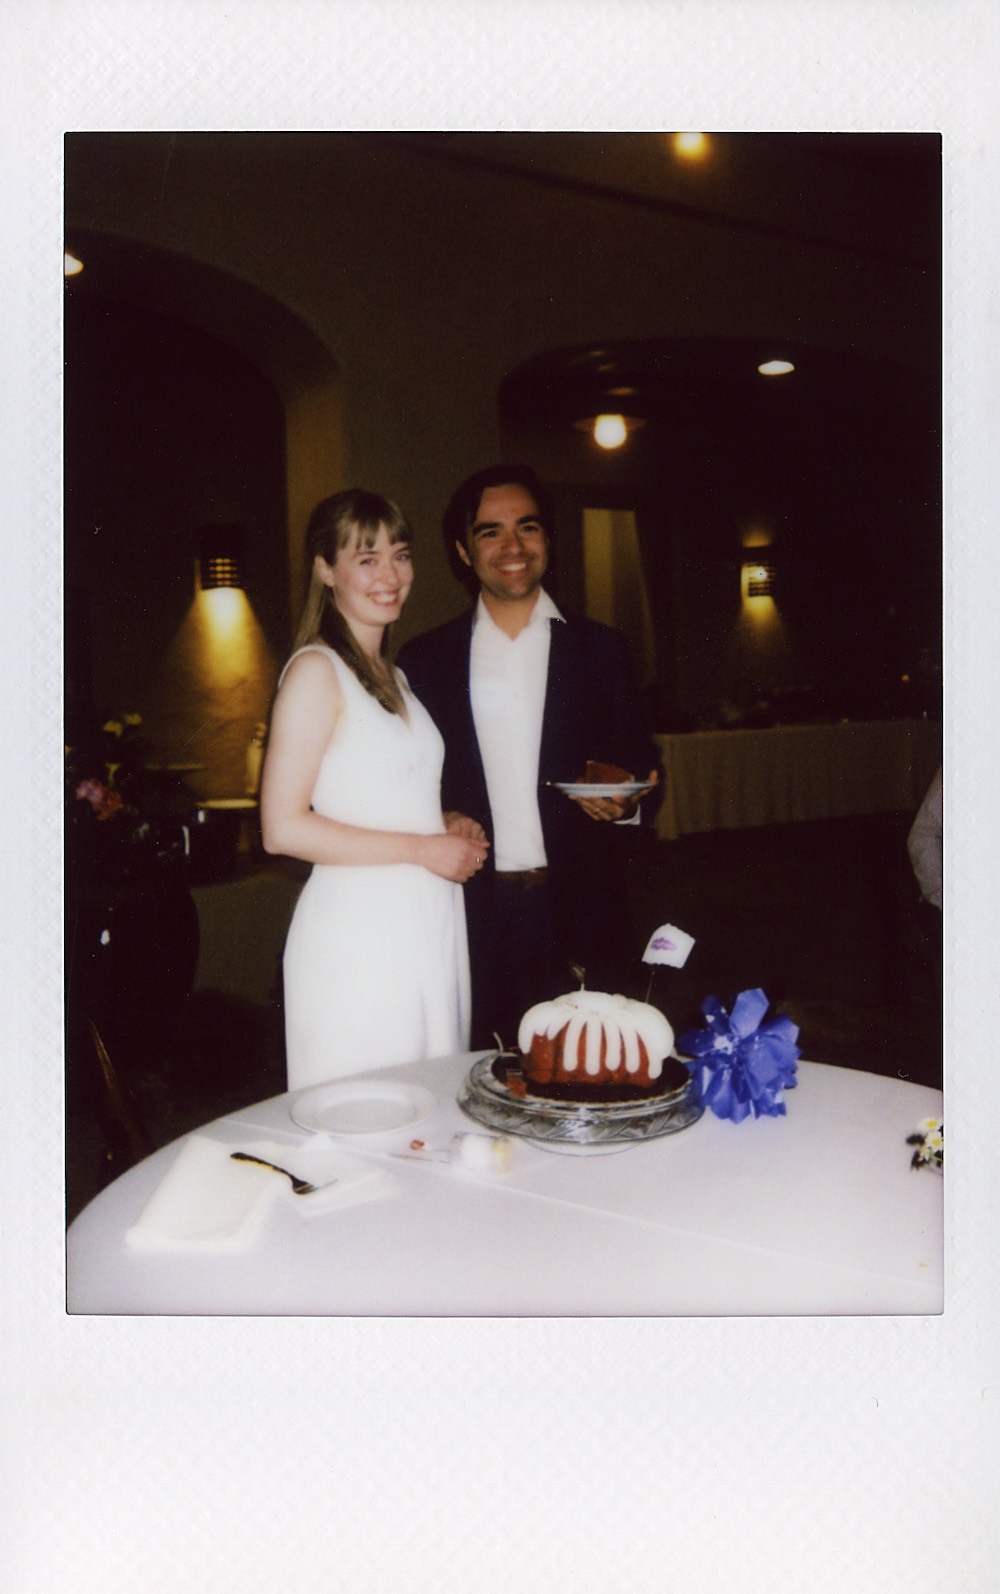 husband and wife with cake